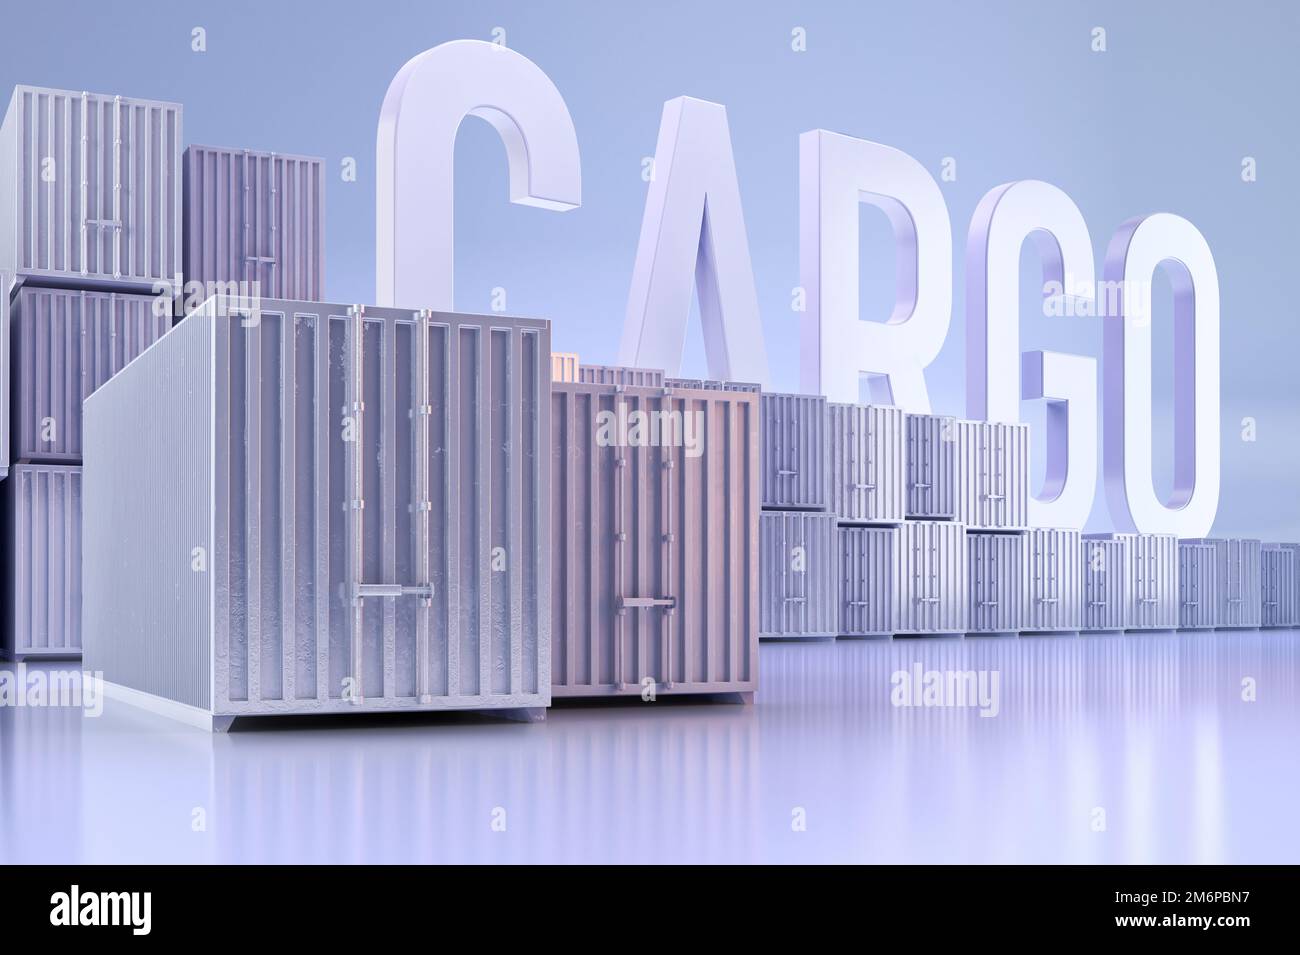 Industrial freight shipping cargo metal containers for transportation,import export logistics, isolated on light background. Export import trading 3D Stock Photo